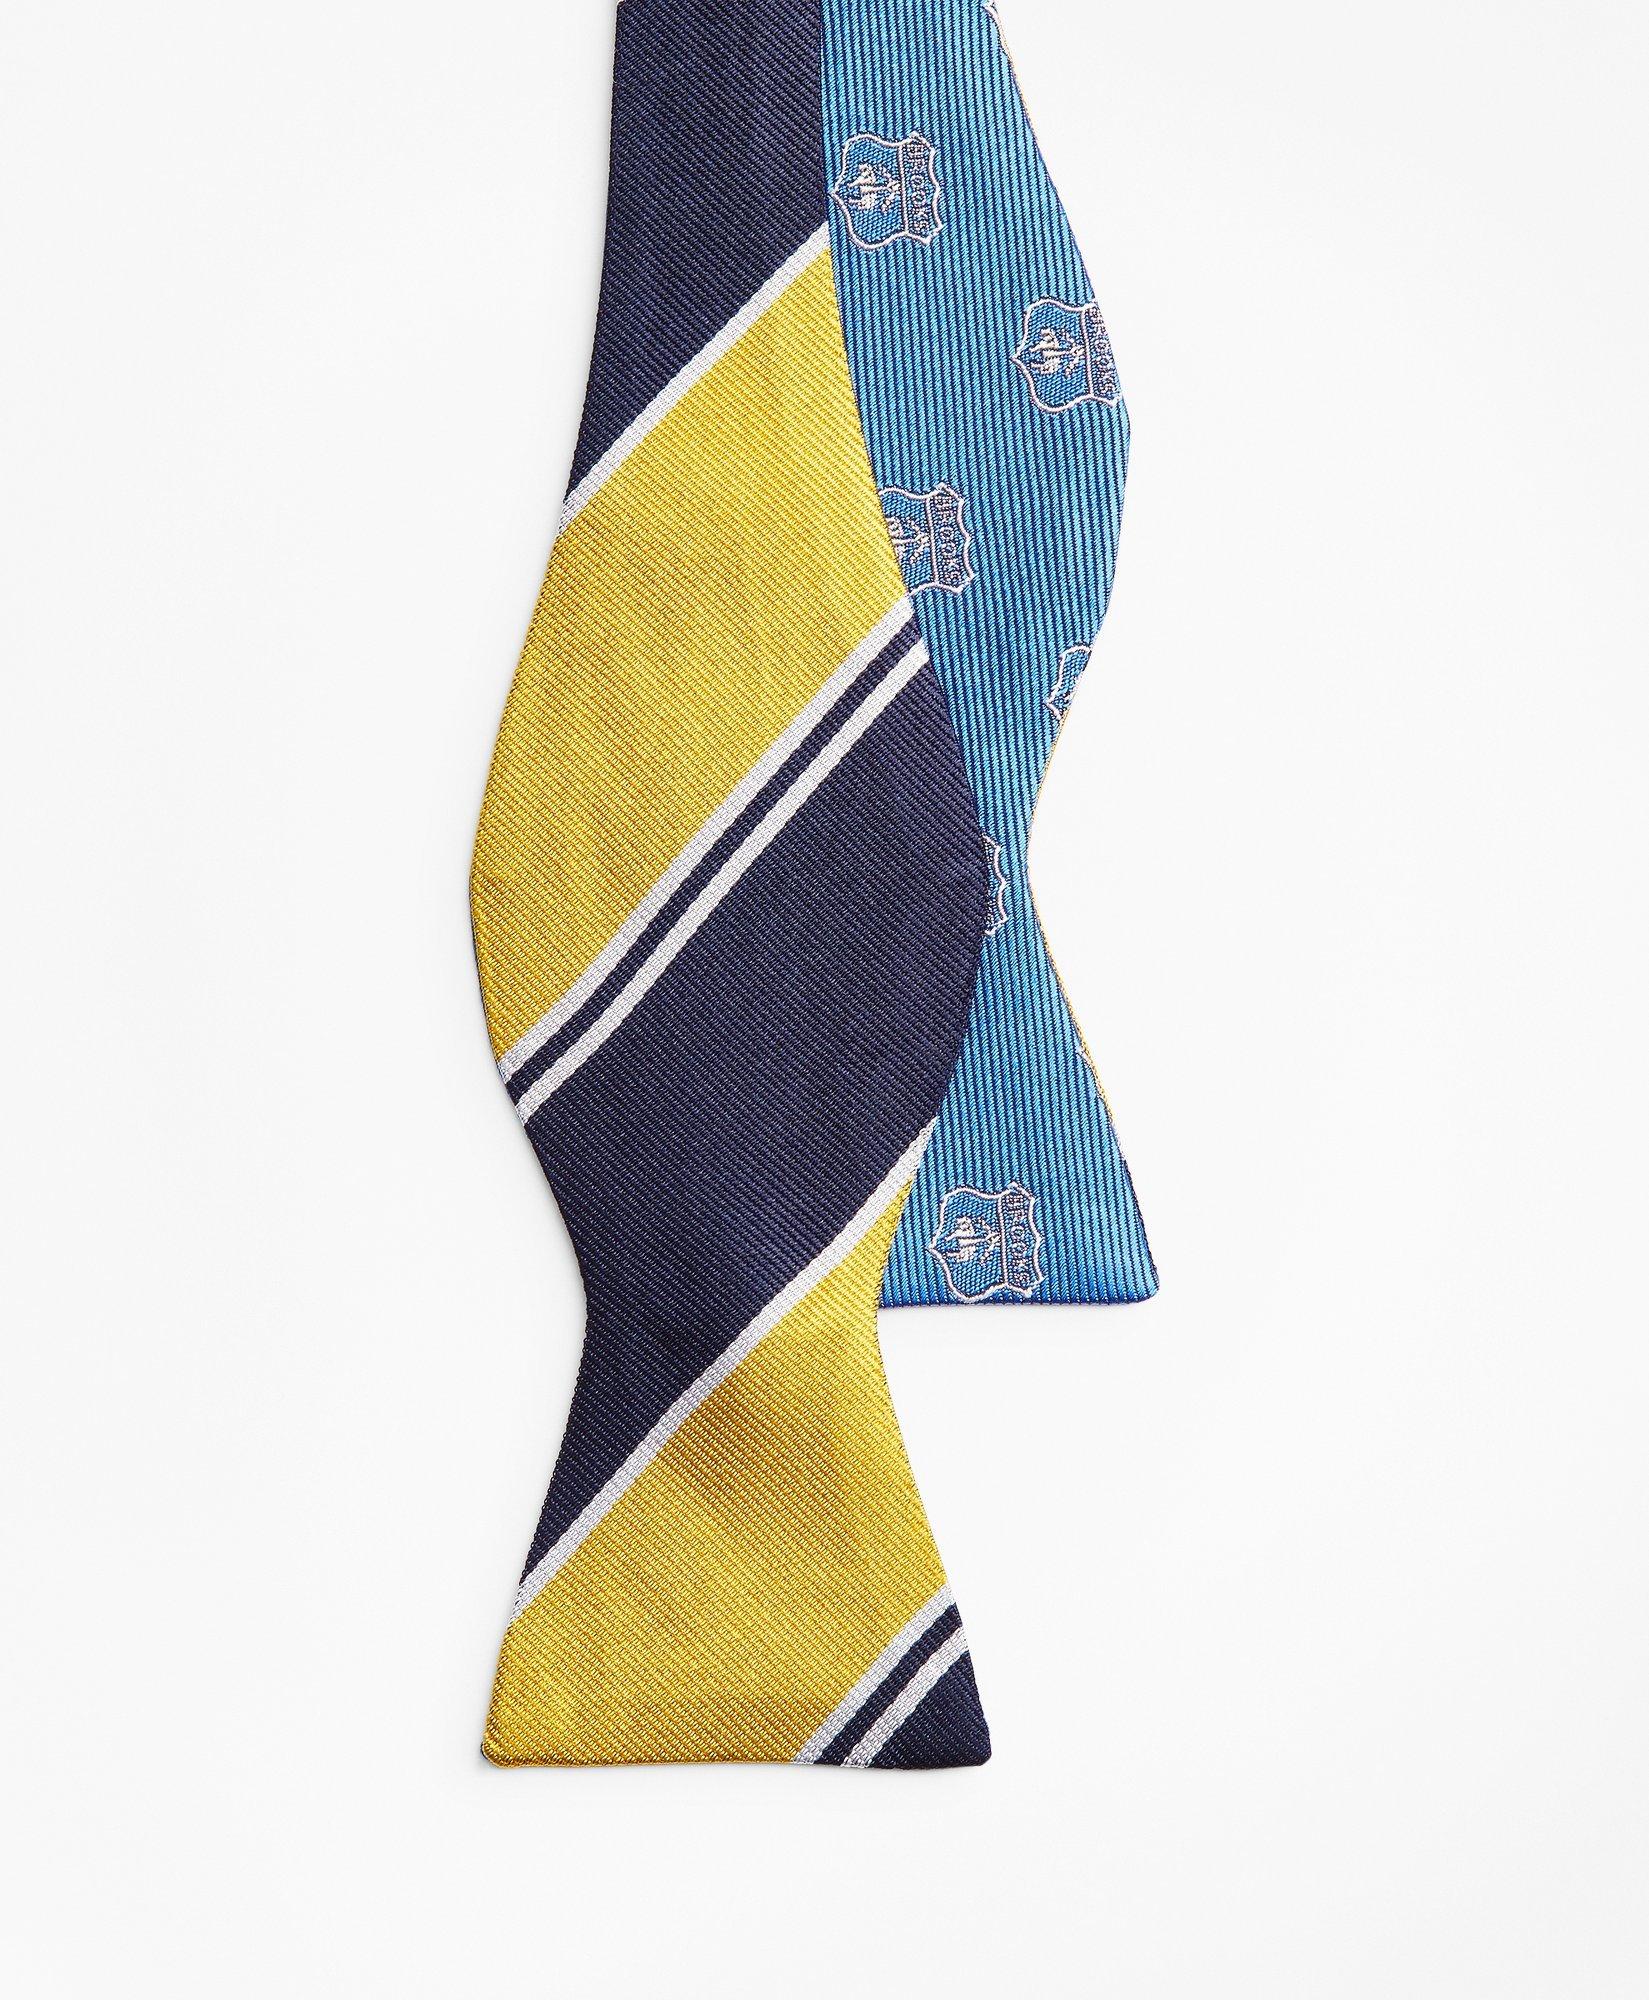 Crest with Stripe Reversible Bow Tie, image 2